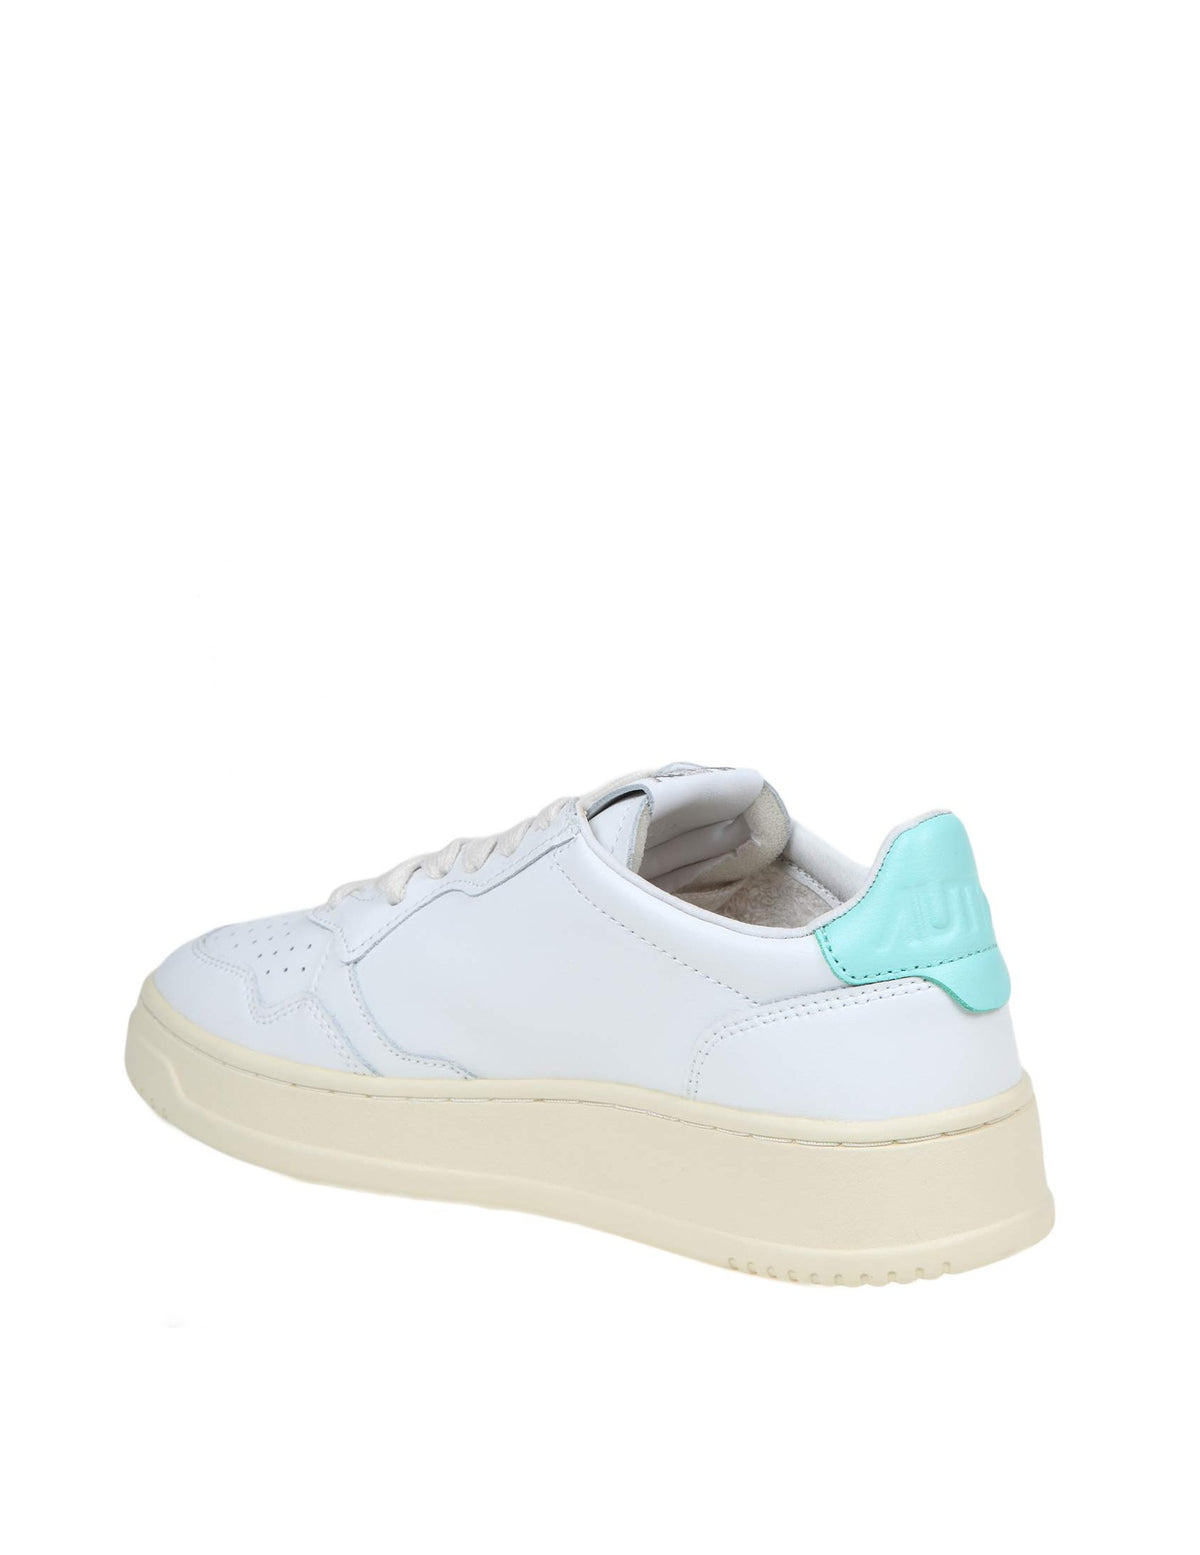 Autry Action Shoes Low Man Leather - Turquoise